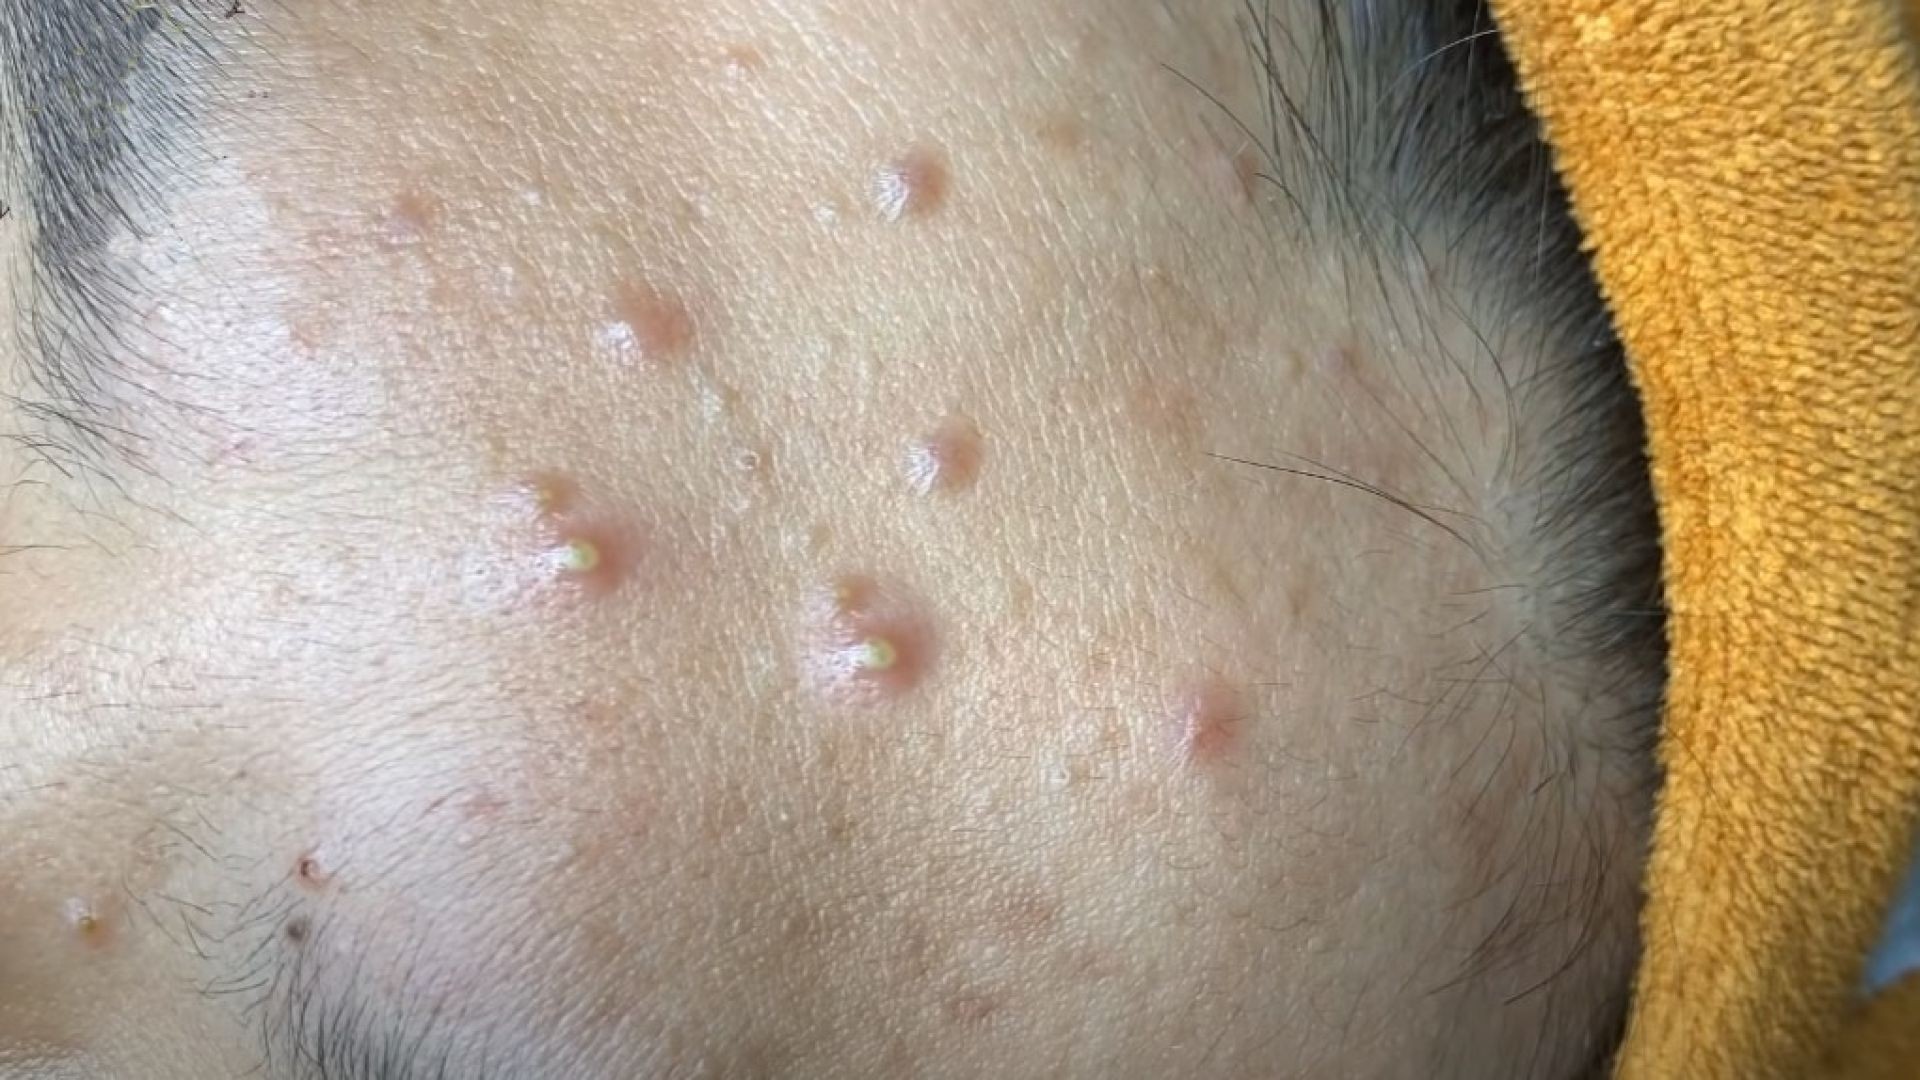 Are You Obsessed With Popping Other People’s Pimples? Then Watch This